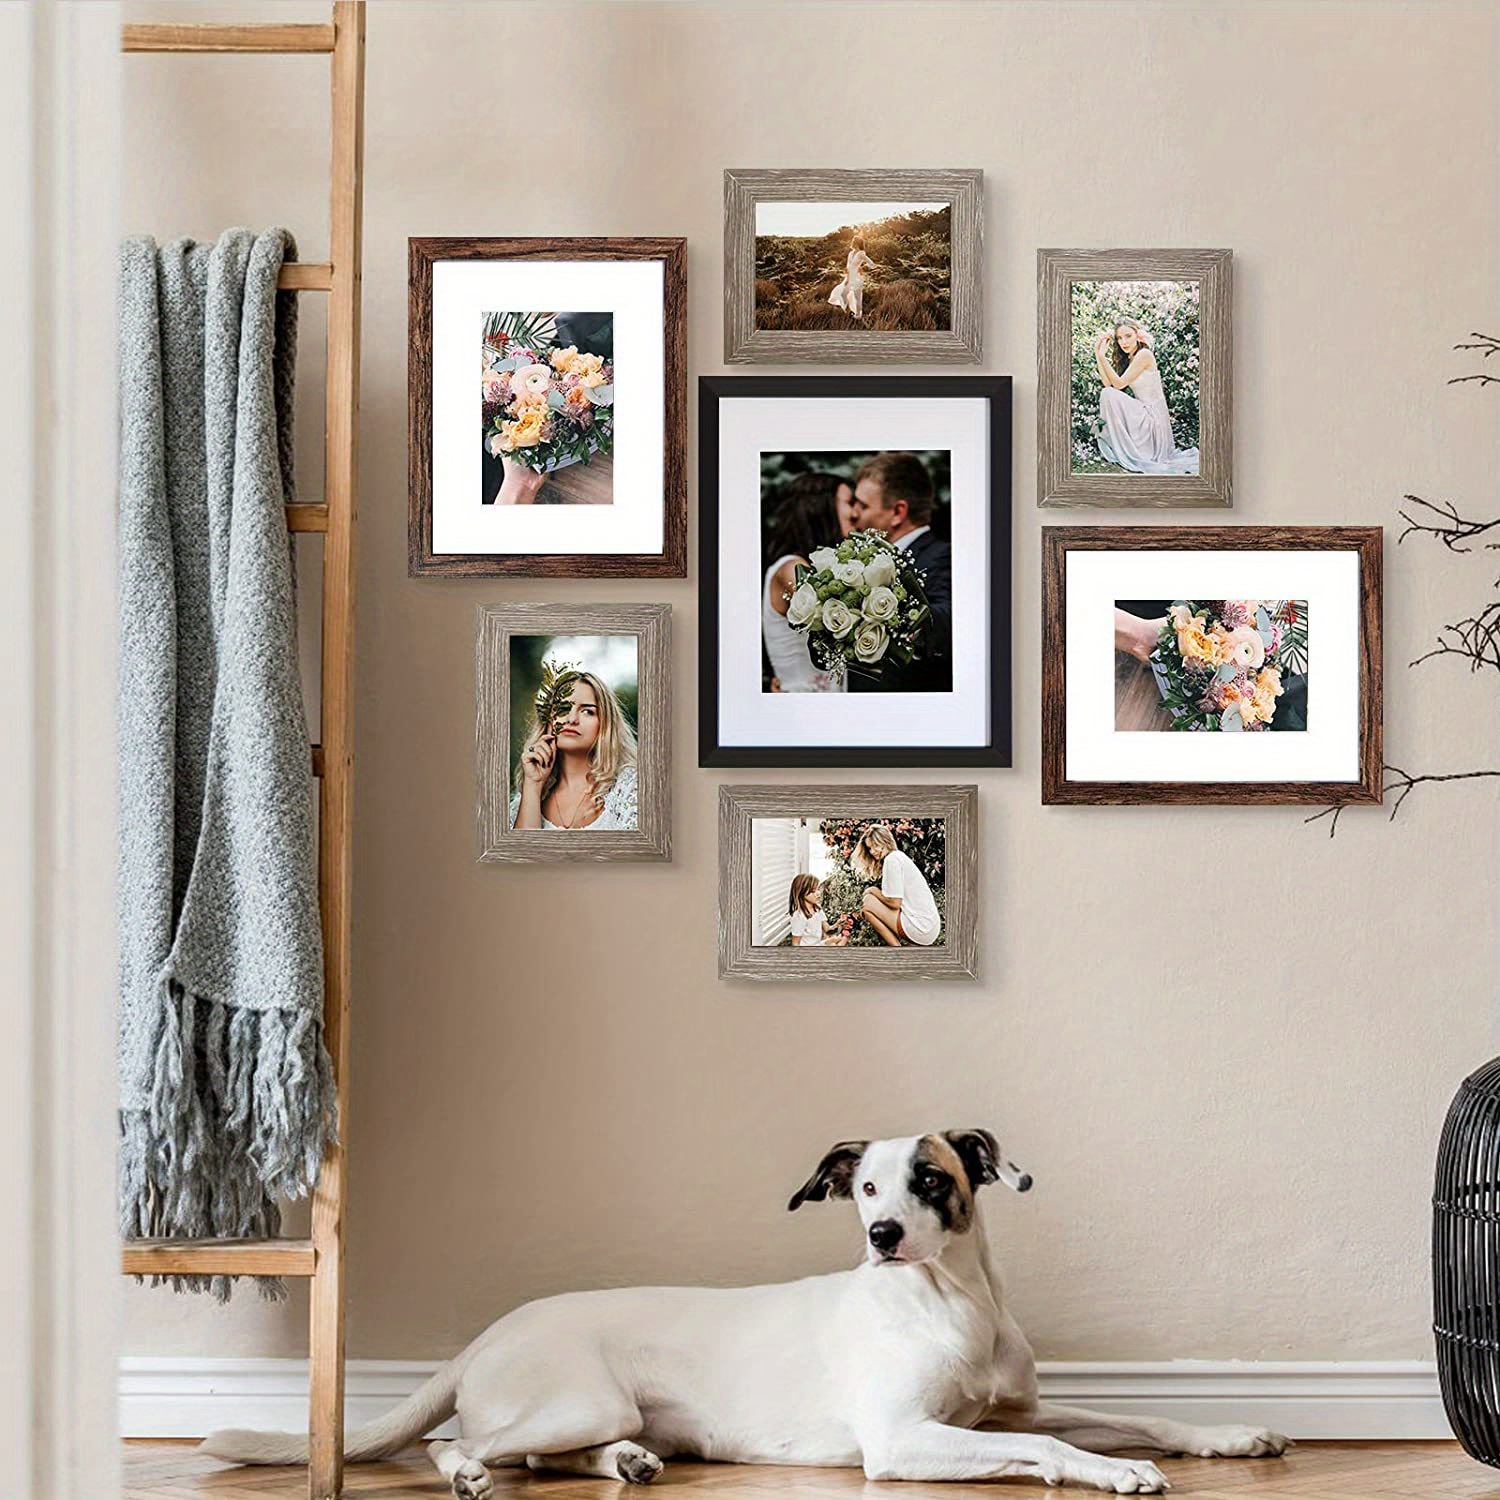 Joveco 10pcs Picture Frames, Collage Picture Frames,Photo Frame Set for Wall Gallery Decor, Hanging or Tabletop Display